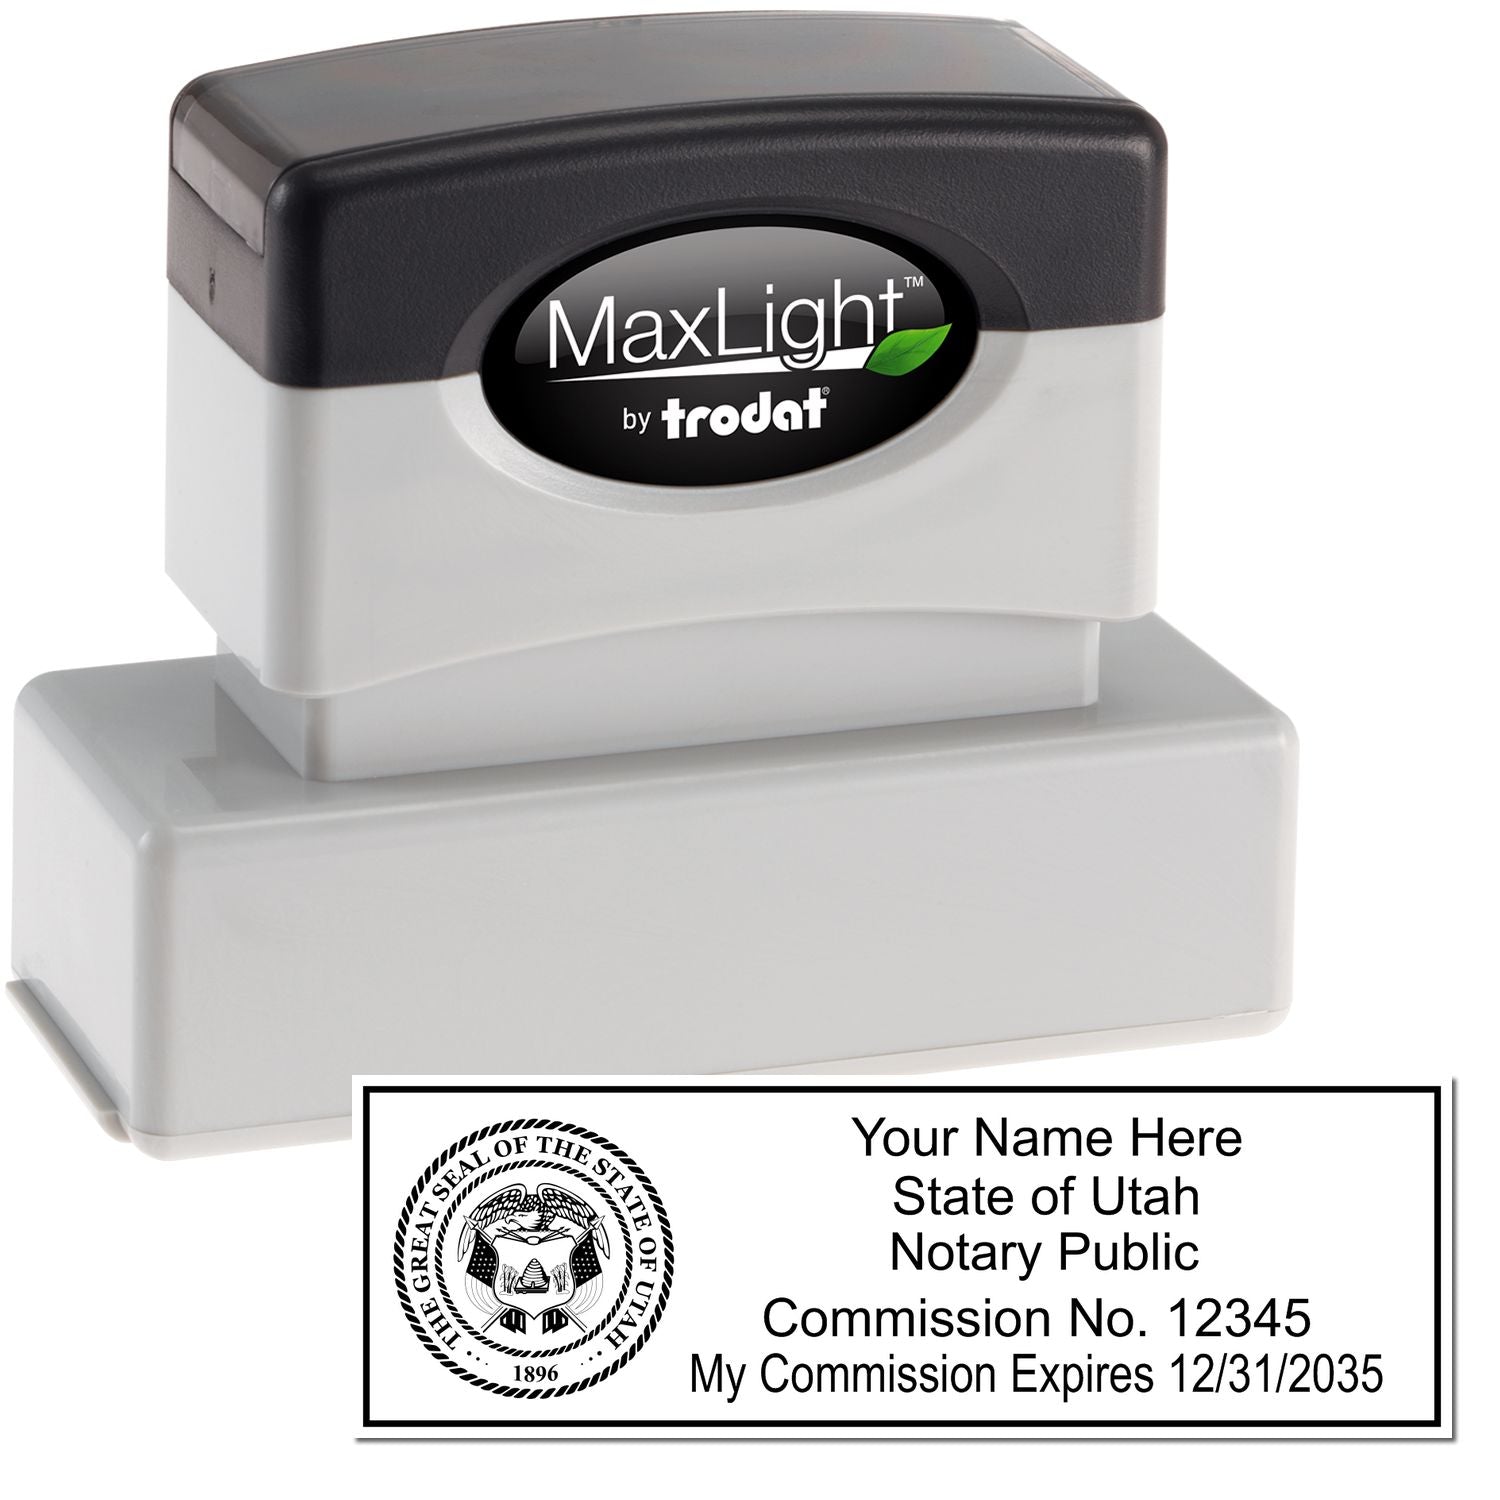 The main image for the MaxLight Premium Pre-Inked Utah State Seal Notarial Stamp depicting a sample of the imprint and electronic files